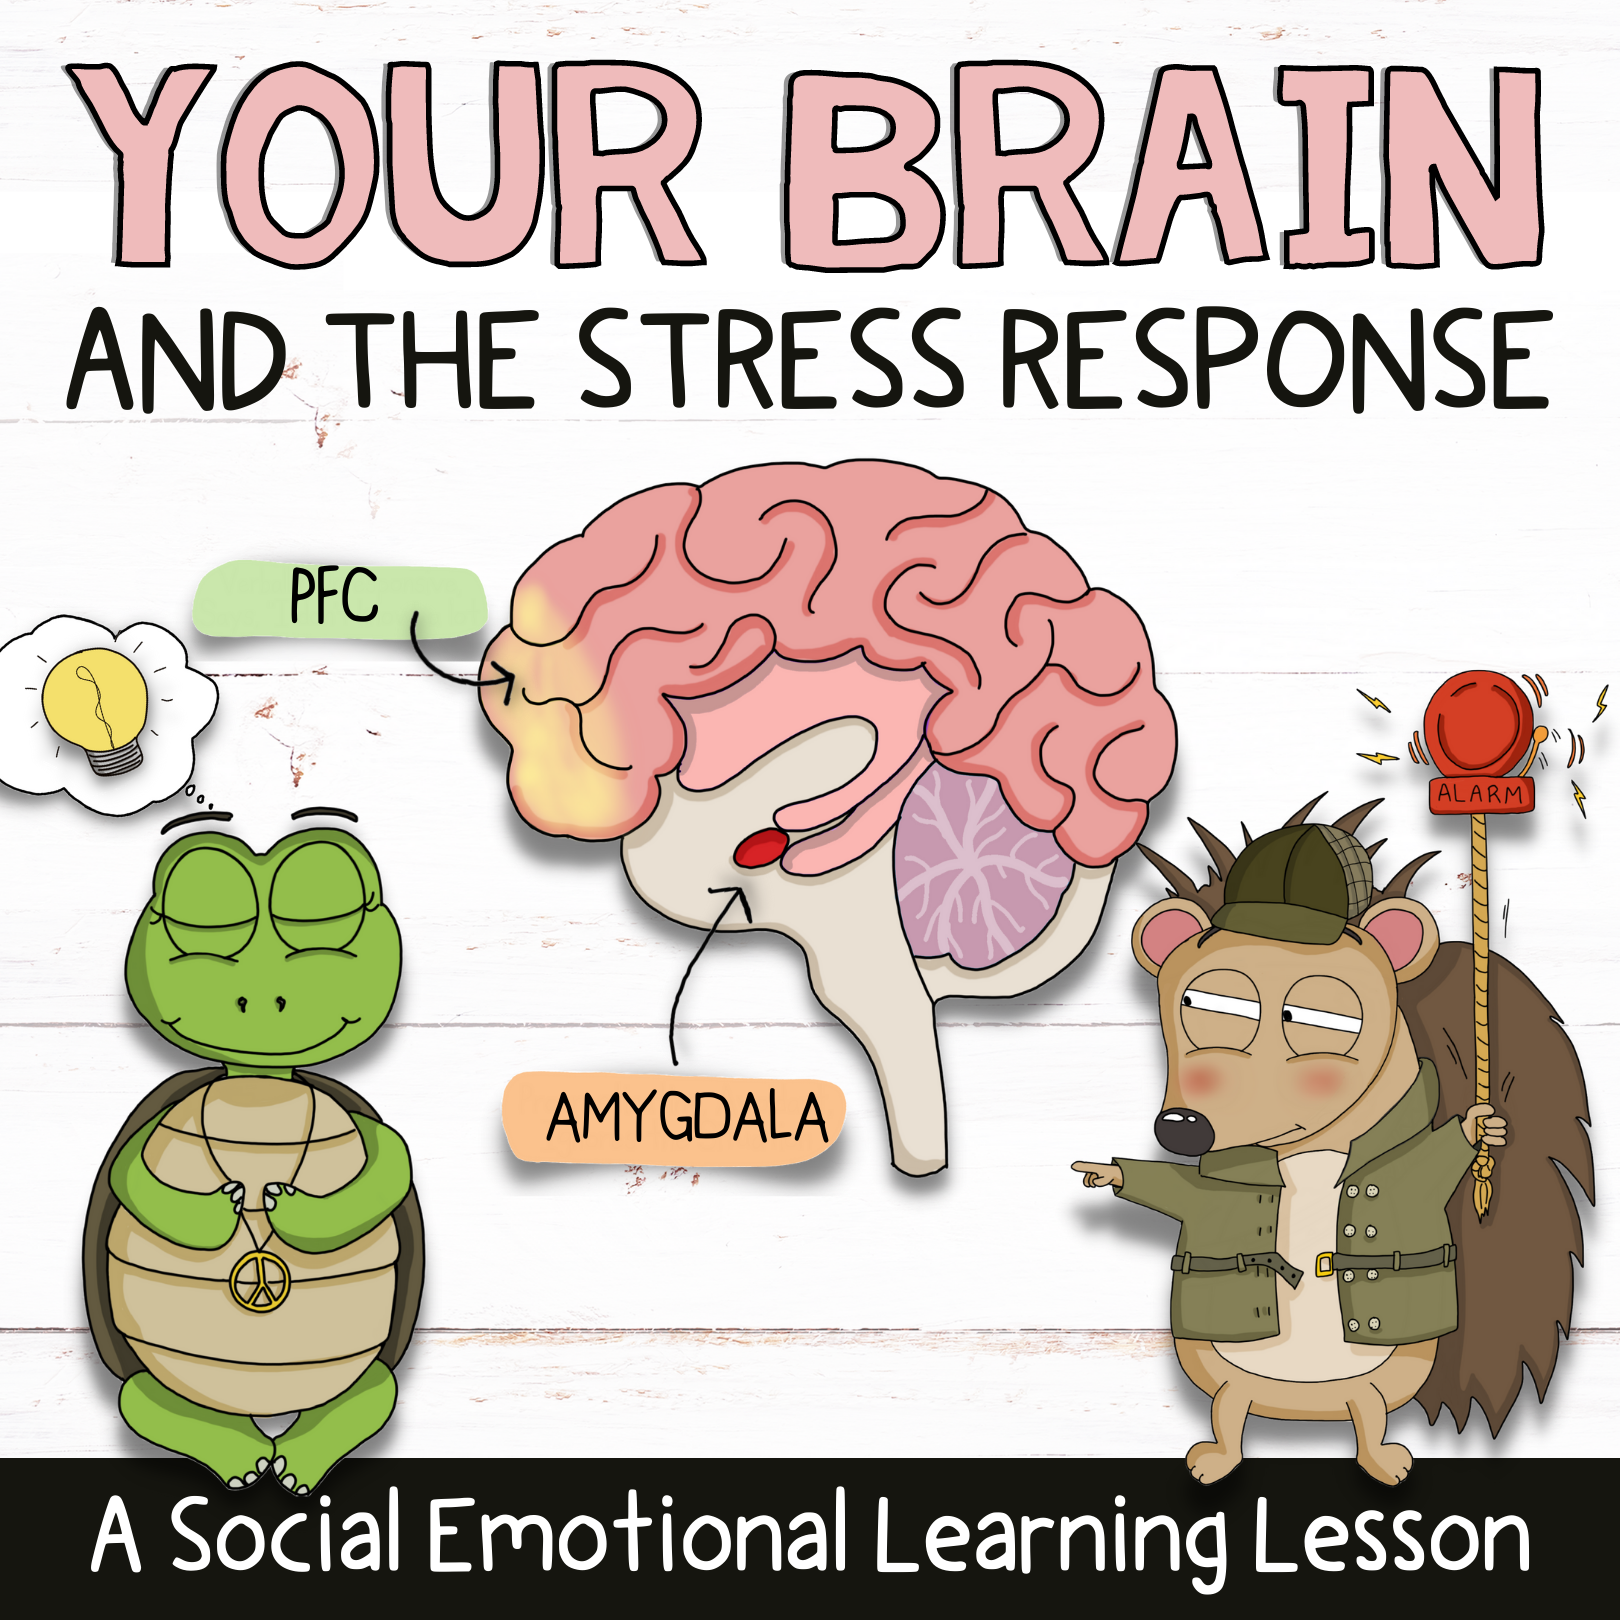 The Brain and Stress Response Social Emotional Learning Lesson